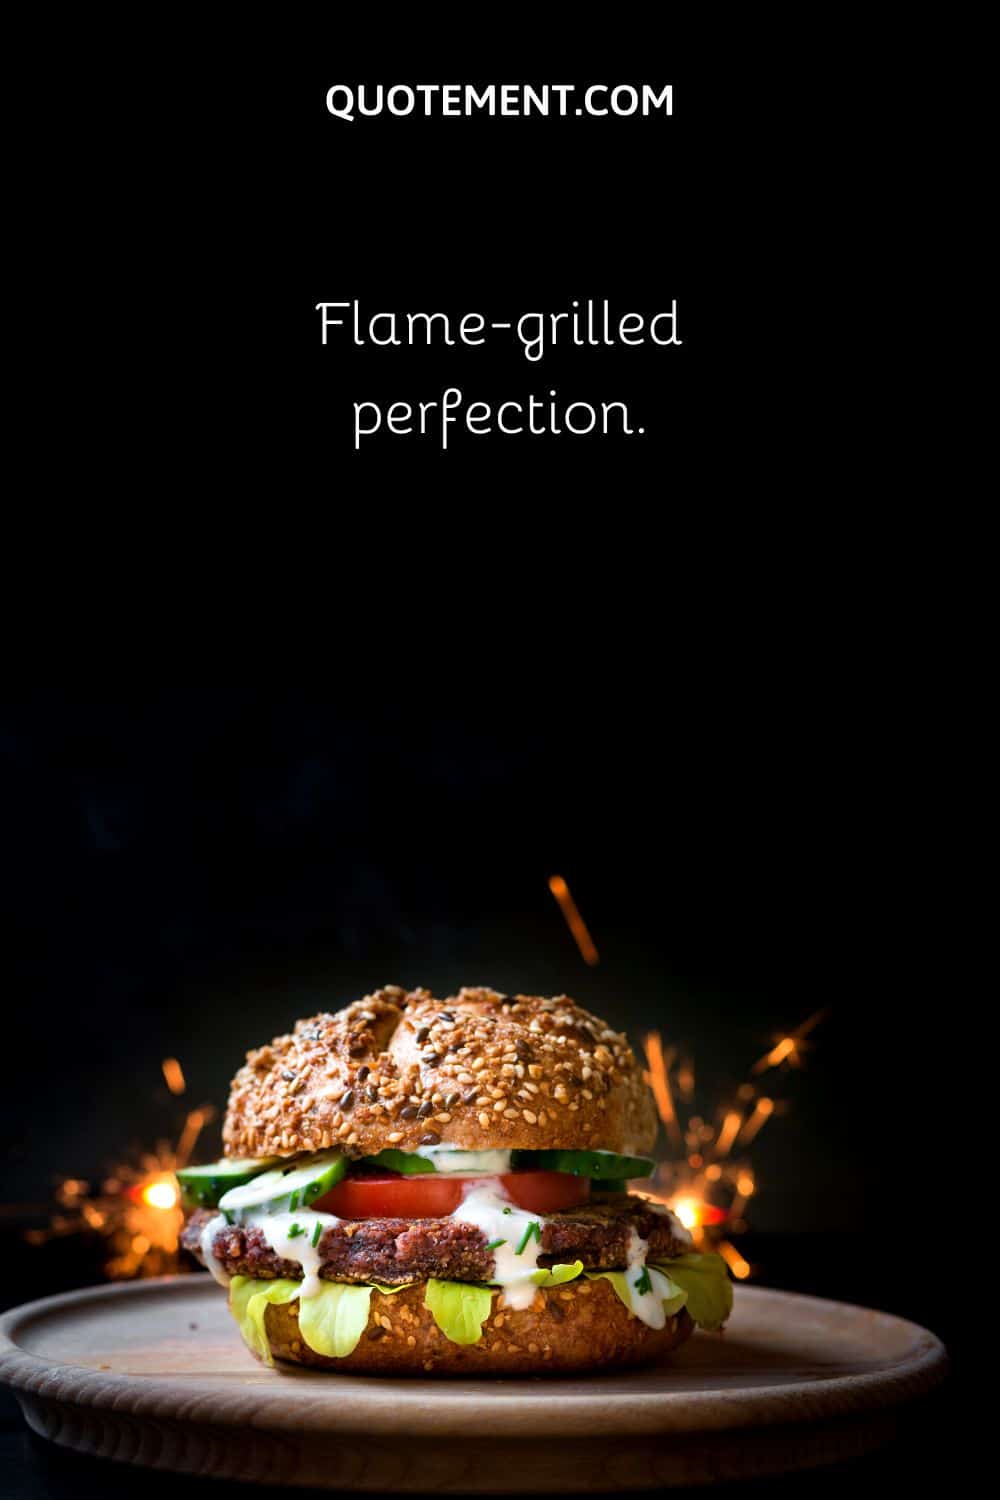 Flame-grilled perfection.